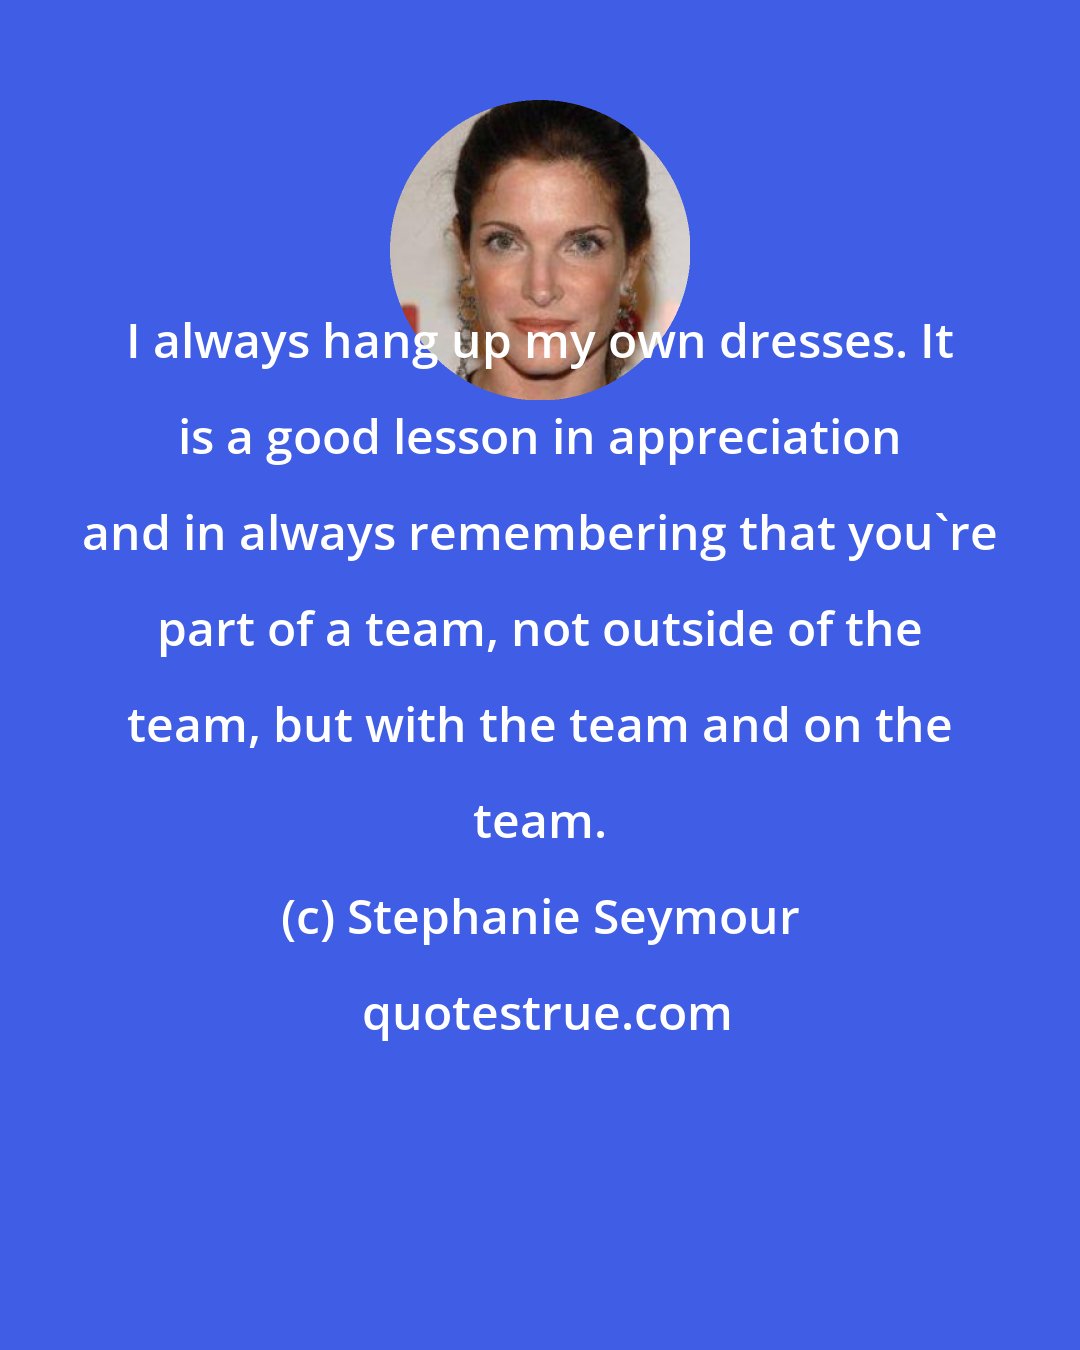 Stephanie Seymour: I always hang up my own dresses. It is a good lesson in appreciation and in always remembering that you're part of a team, not outside of the team, but with the team and on the team.